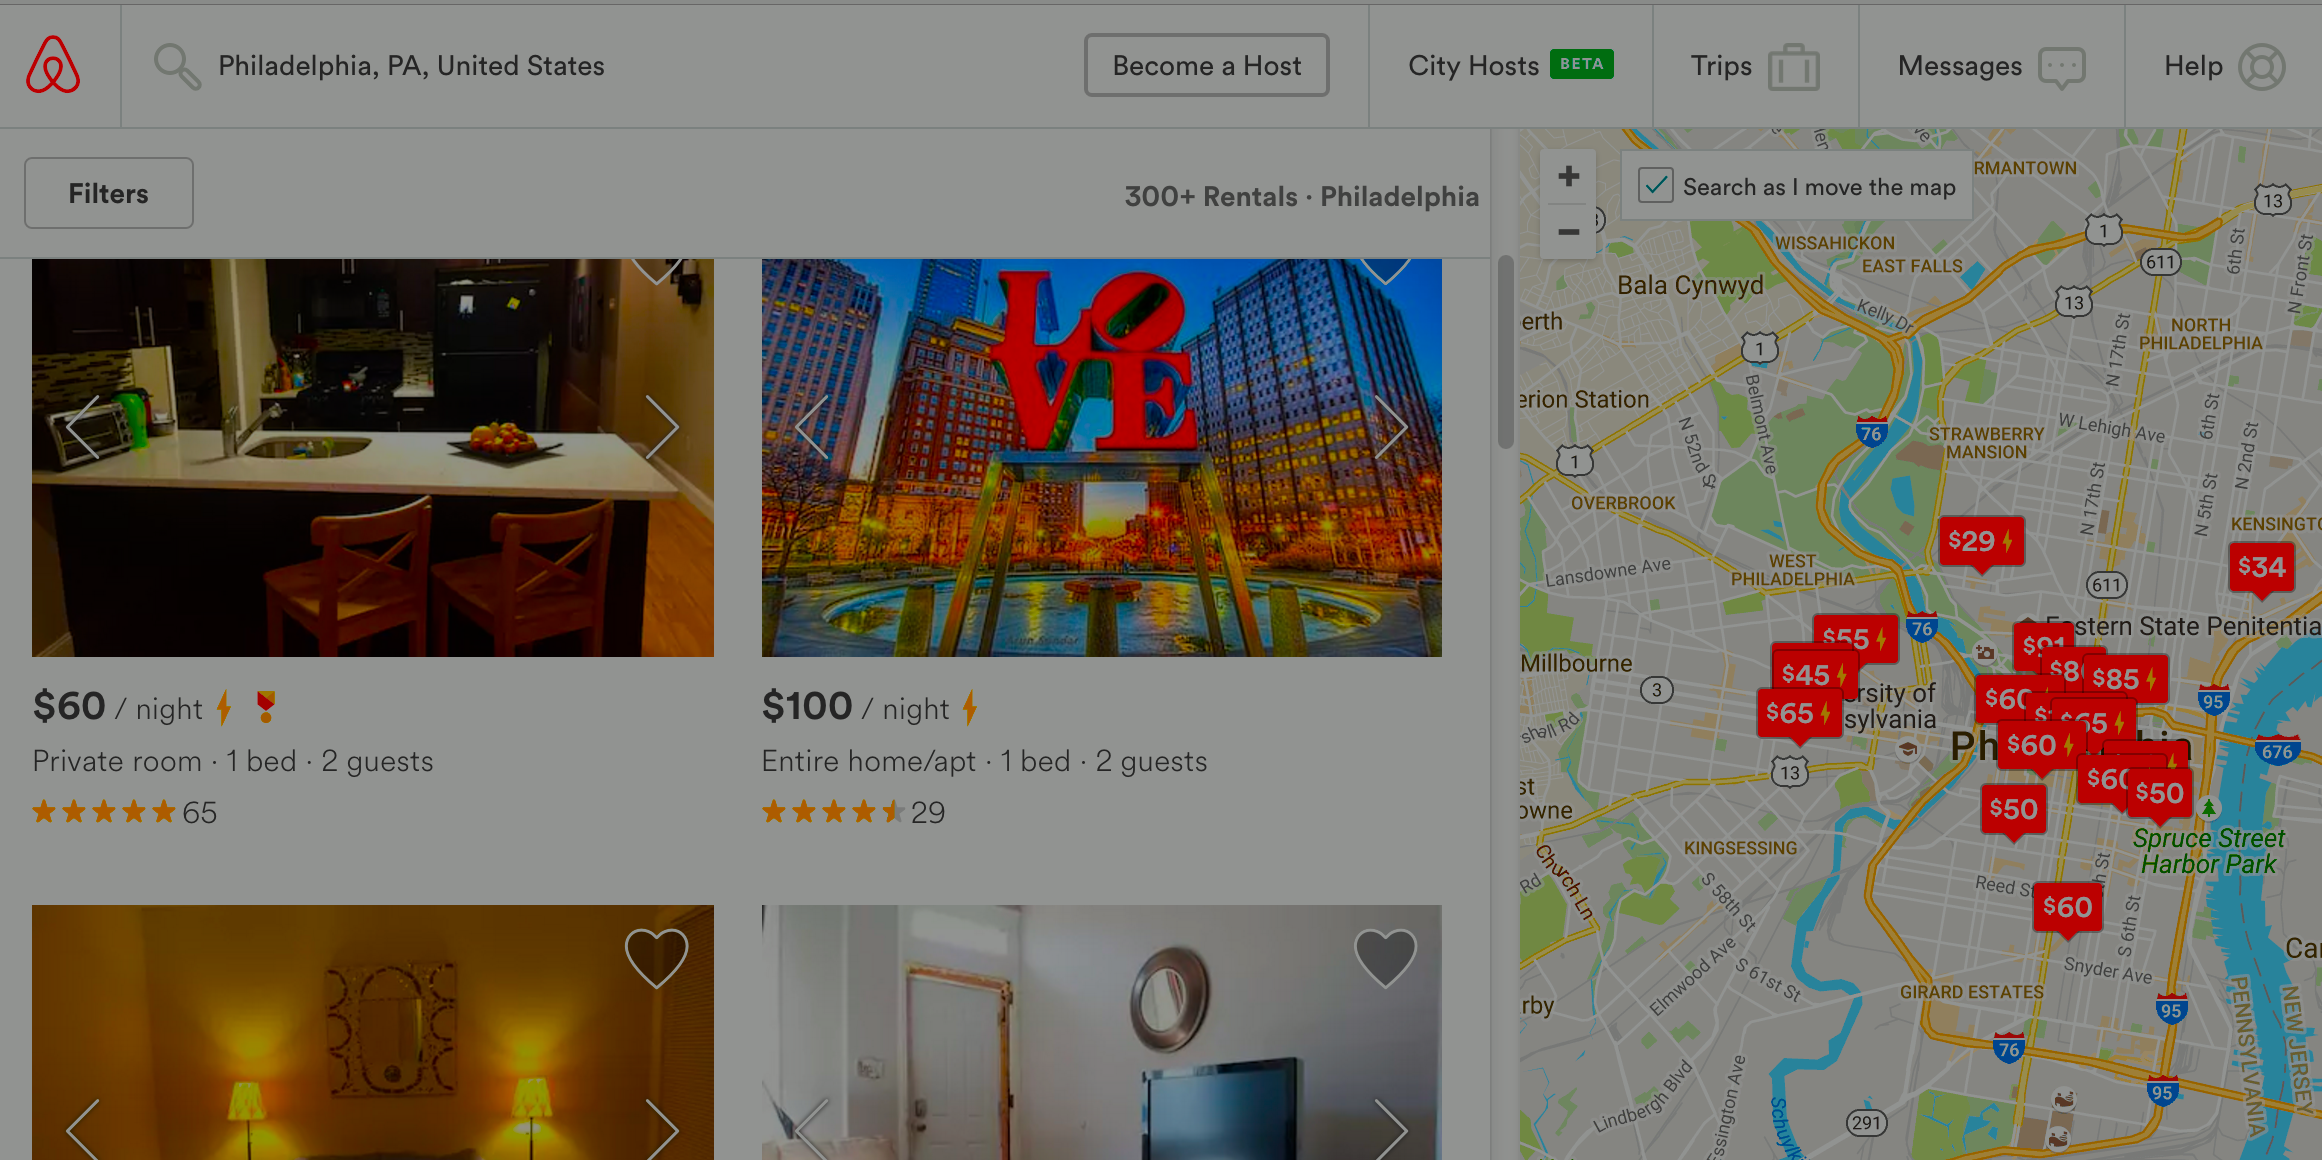 Judge: Airbnb Can Force Users’ Racial Discrimination Claims Out Of Courtroom